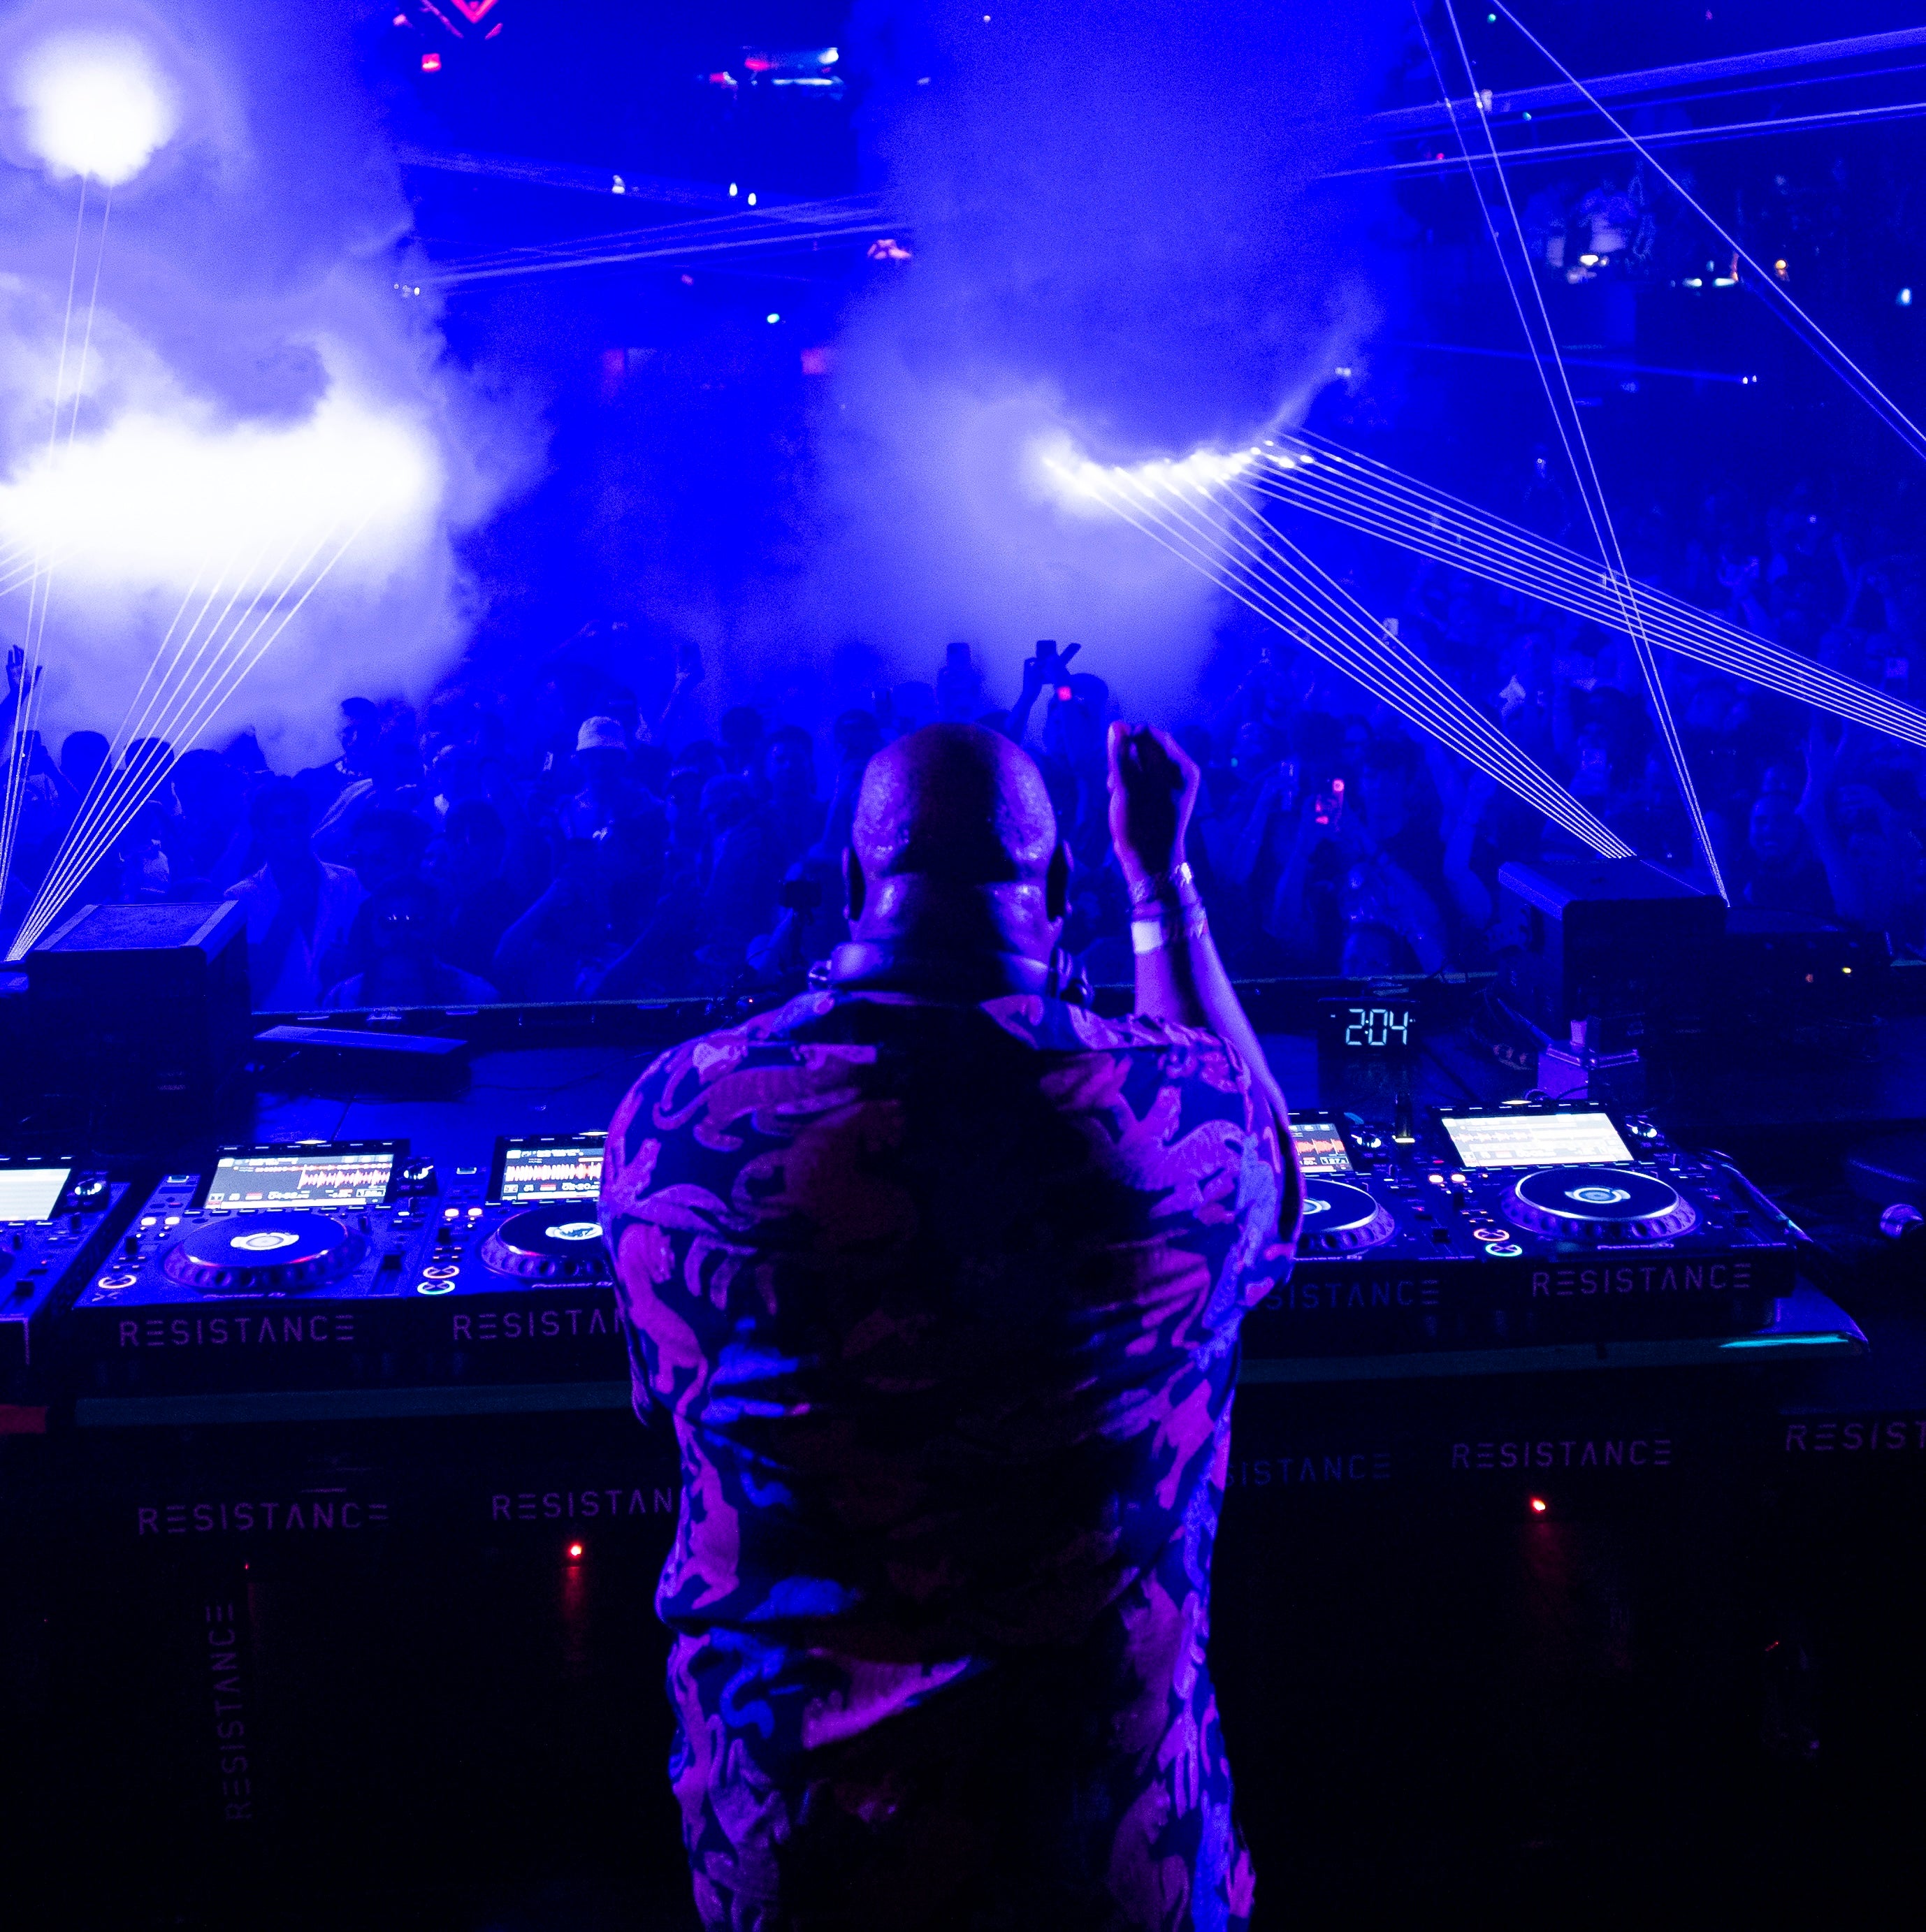 [EVENT REVIEW] Carl Cox Casts A Hypnotic Techno-Fueled Spell Over M2 For RESISTANCE's Miami Race Week Takeover